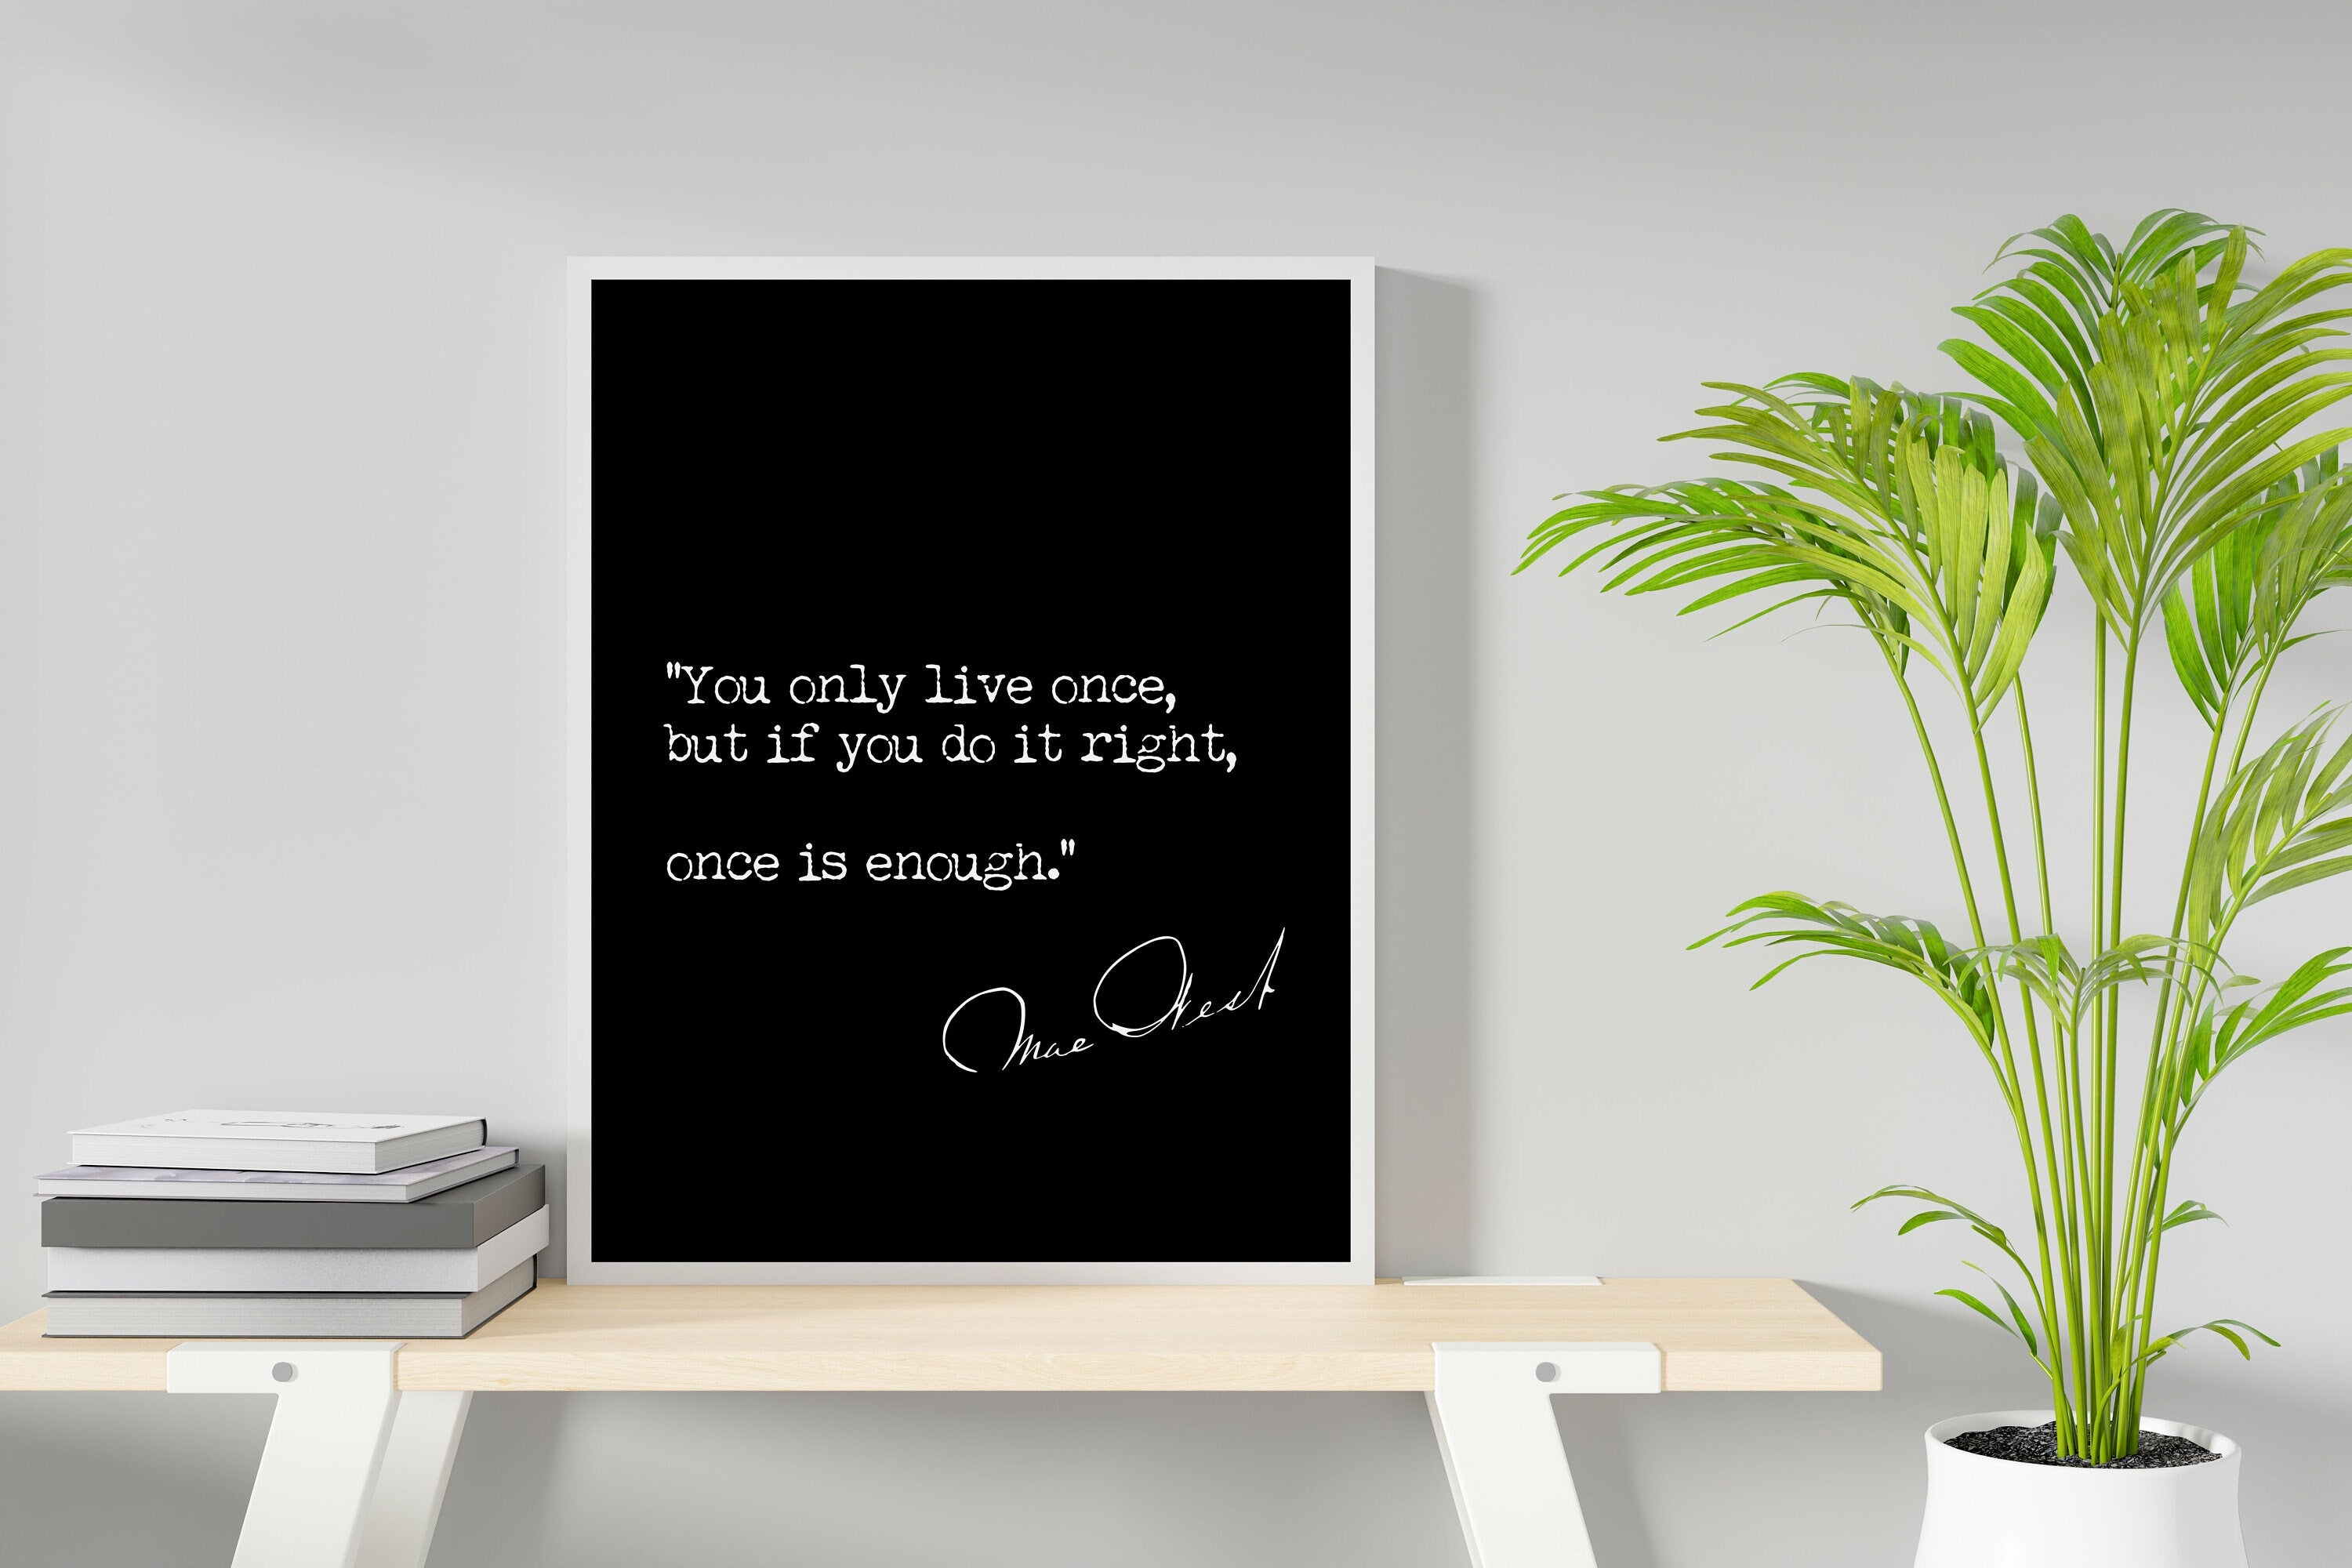 Mae West Quote Art Print - "You only live once, but if you do it right, once is enough", Available Framed or Unframed in Black and White